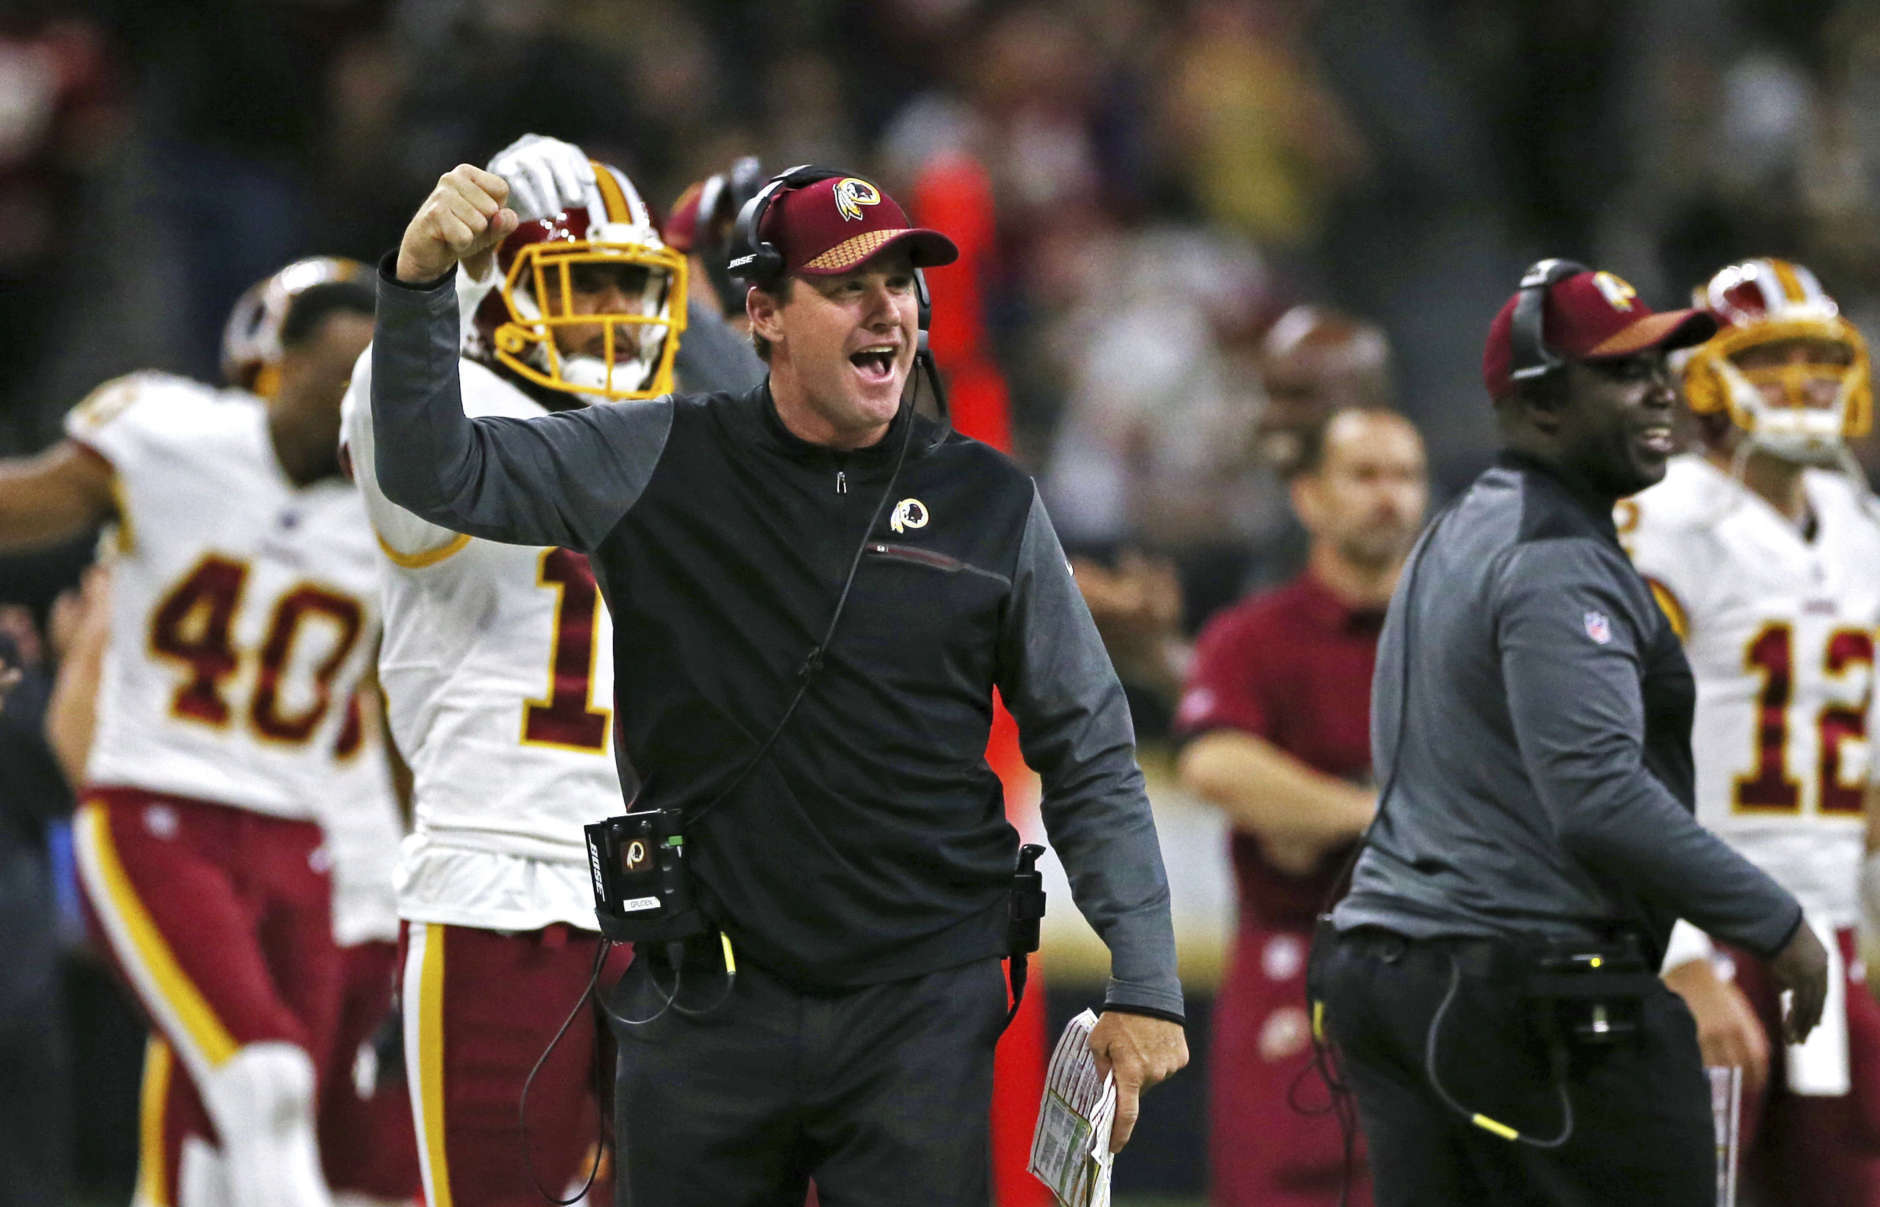 Washington Redskins head coach Jay Gruden reacts after a touchdown repletion by tight end Jeremy Sprinkle in the second half of an NFL football game against the New Orleans Saints in New Orleans, Sunday, Nov. 19, 2017. (AP Photo/Rusty Costanza)